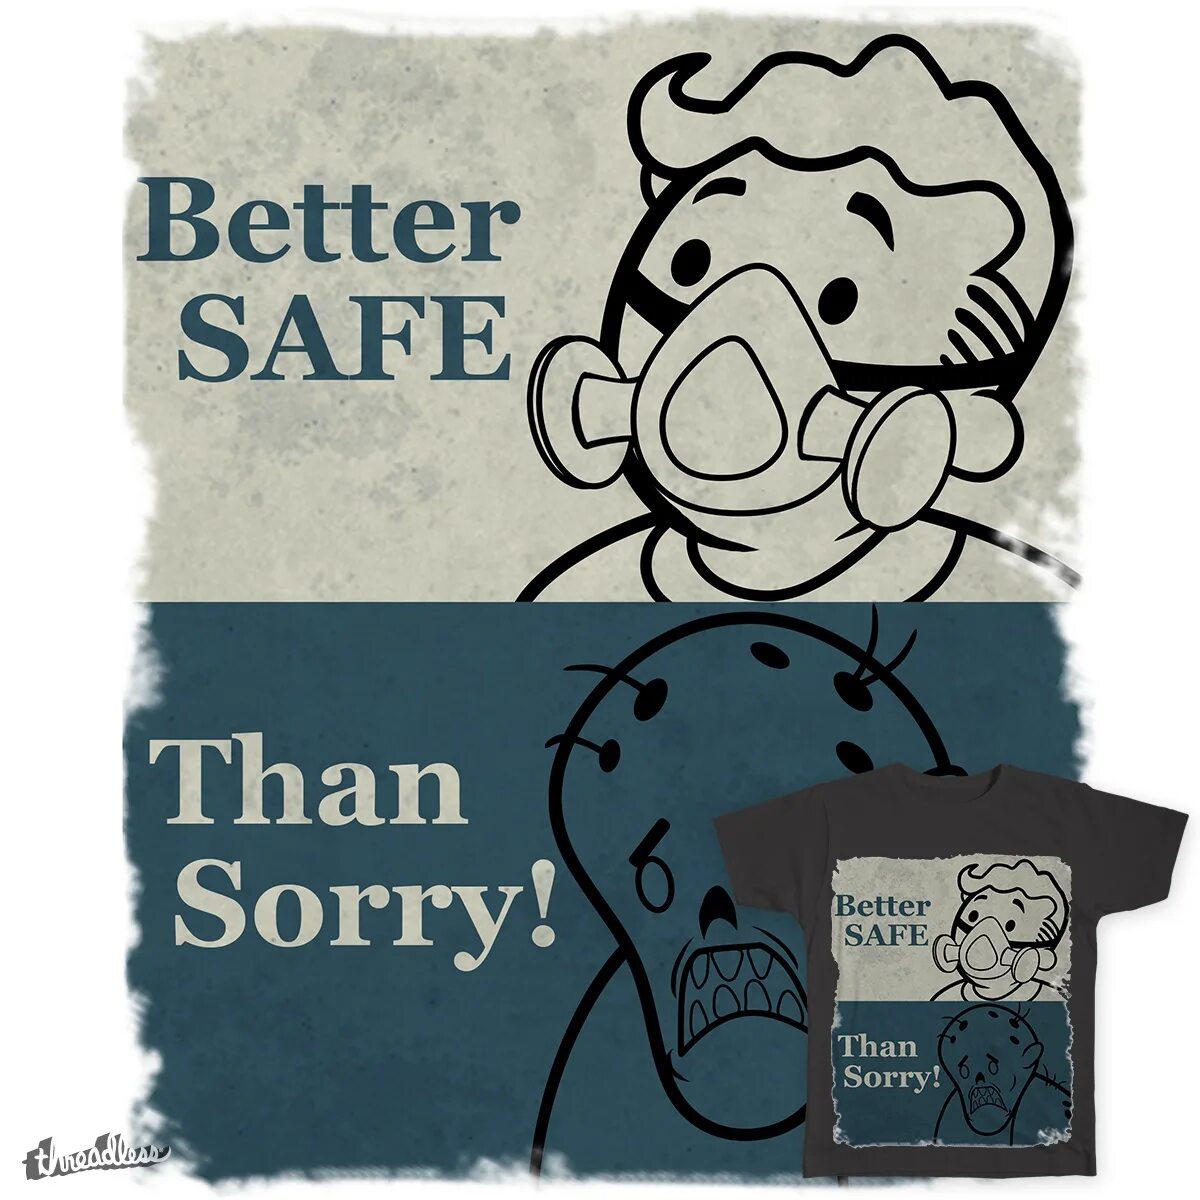 Its better. Better safe than sorry. Better to be safe than sorry. It’s better to be safe than sorry. Better safe than sorry meaning.